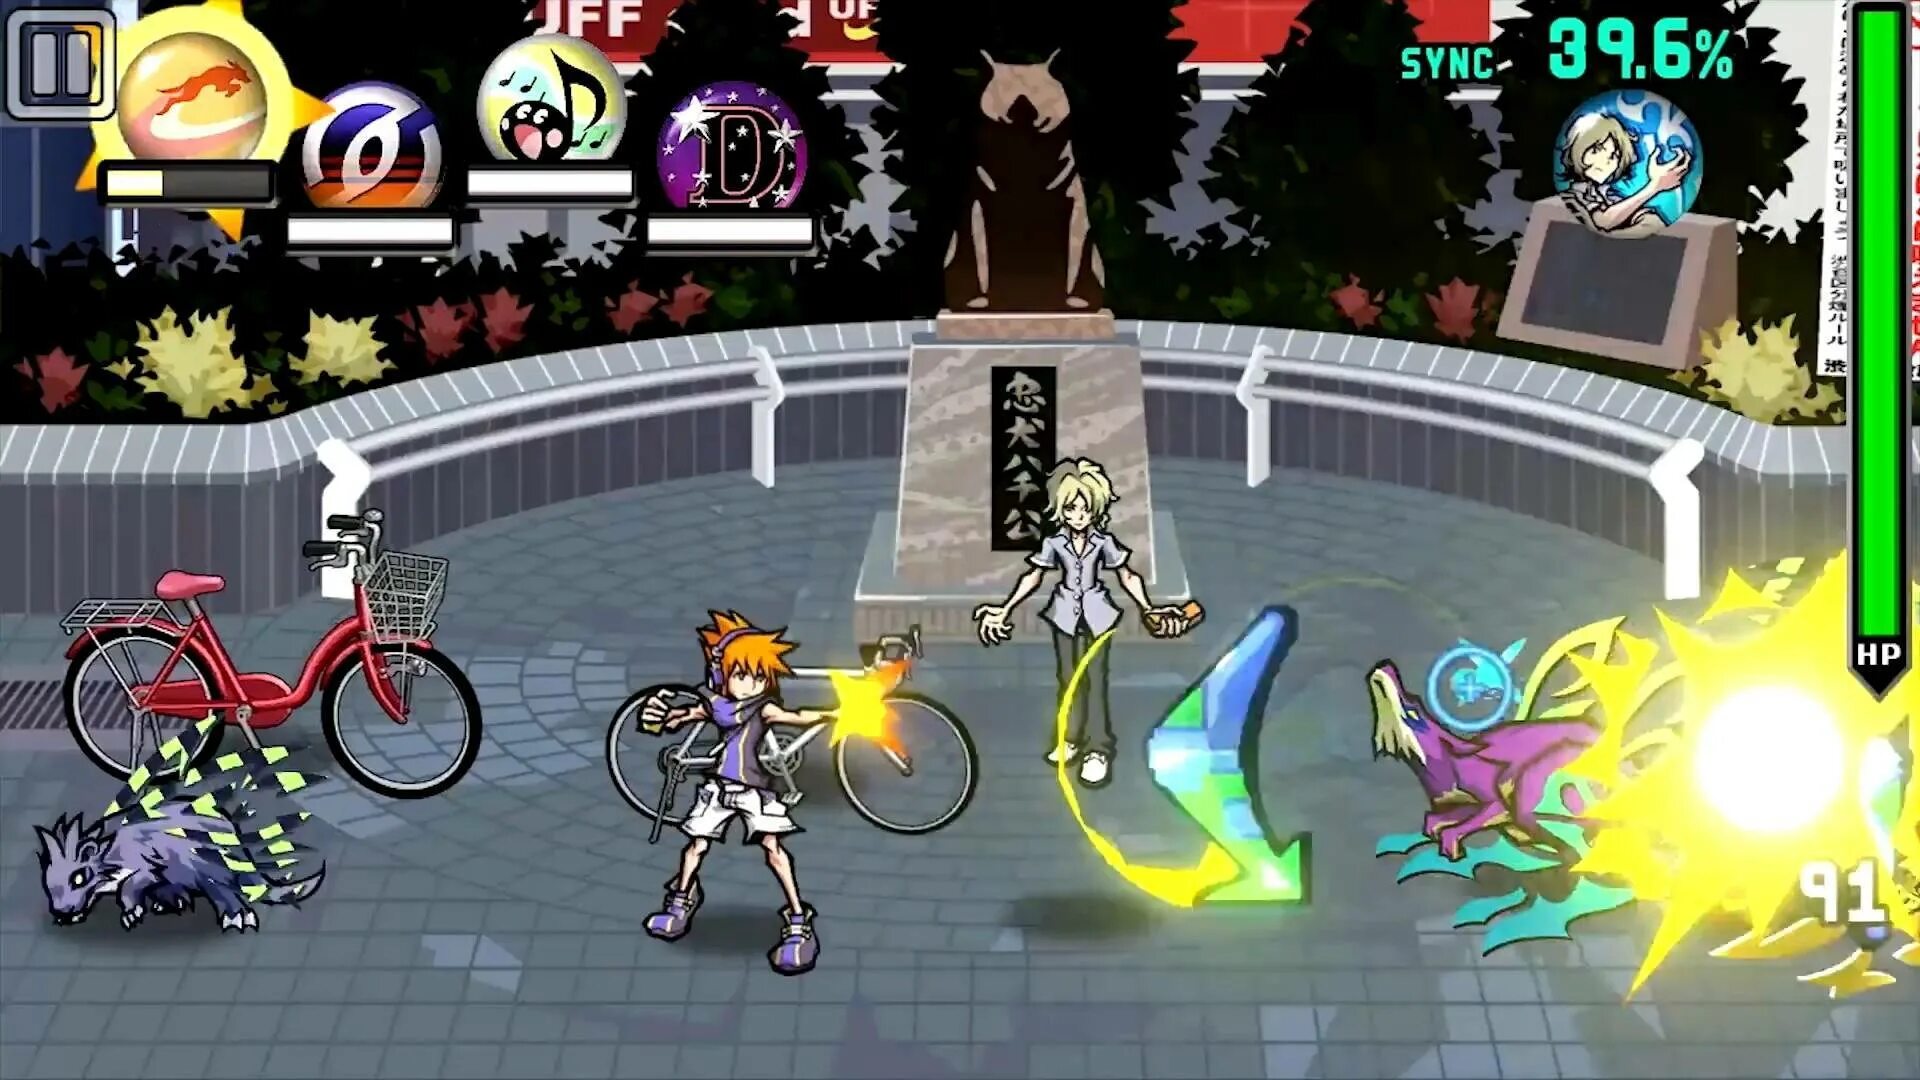 The World ends with you игра. The World ends with you DS. The World ends with you Nintendo DS. The World ends with you 3ds. When the game ends